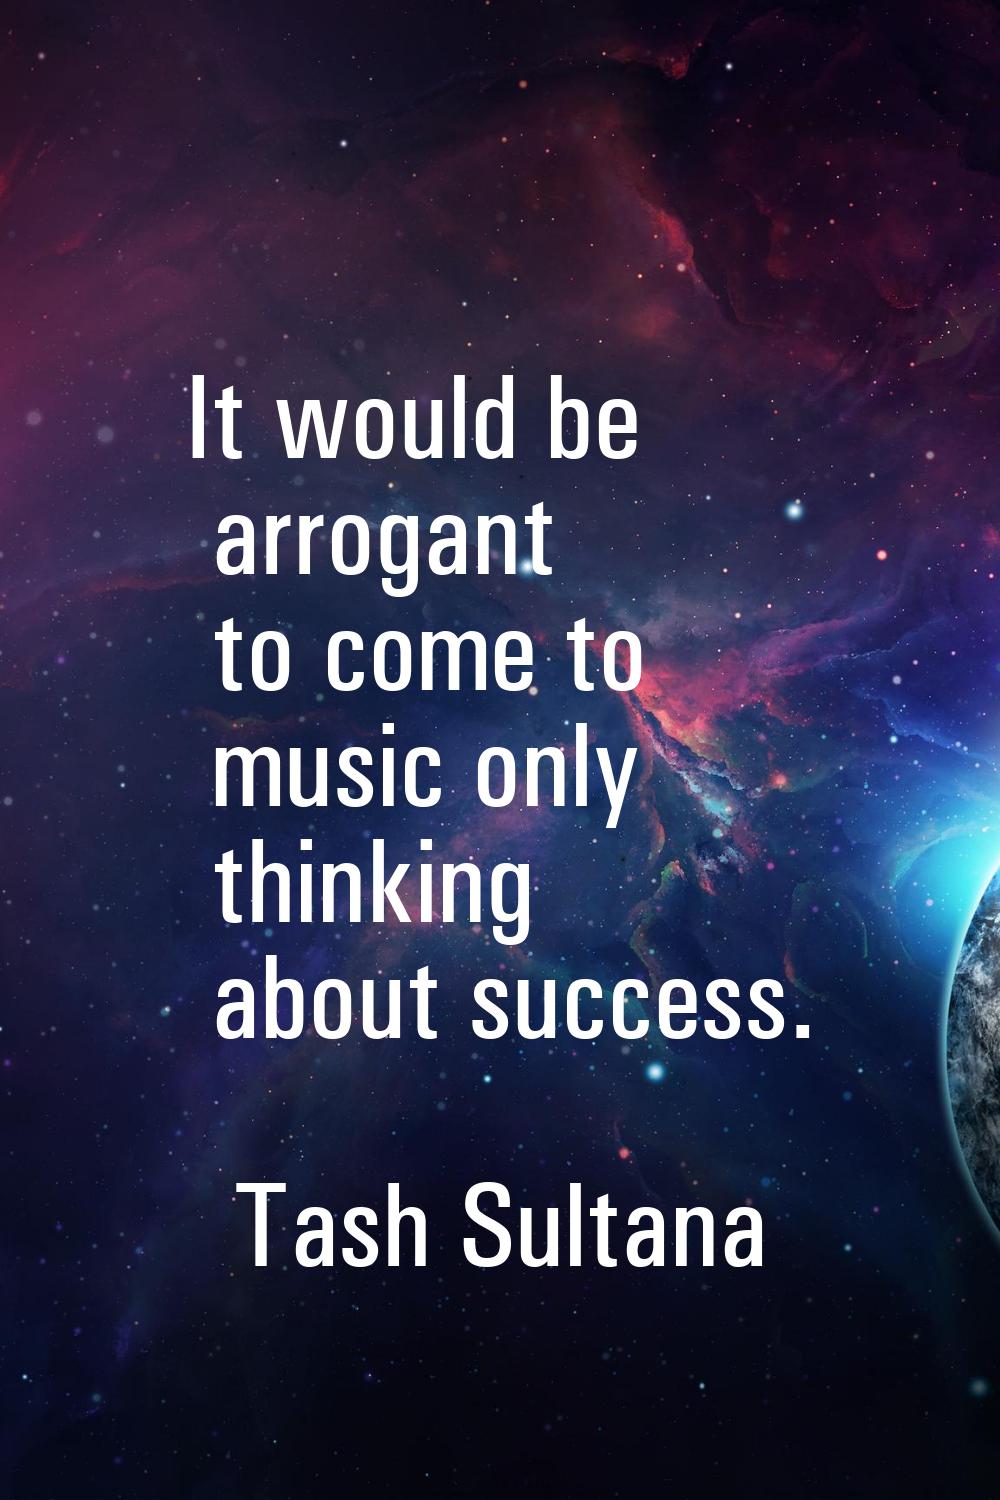 It would be arrogant to come to music only thinking about success.